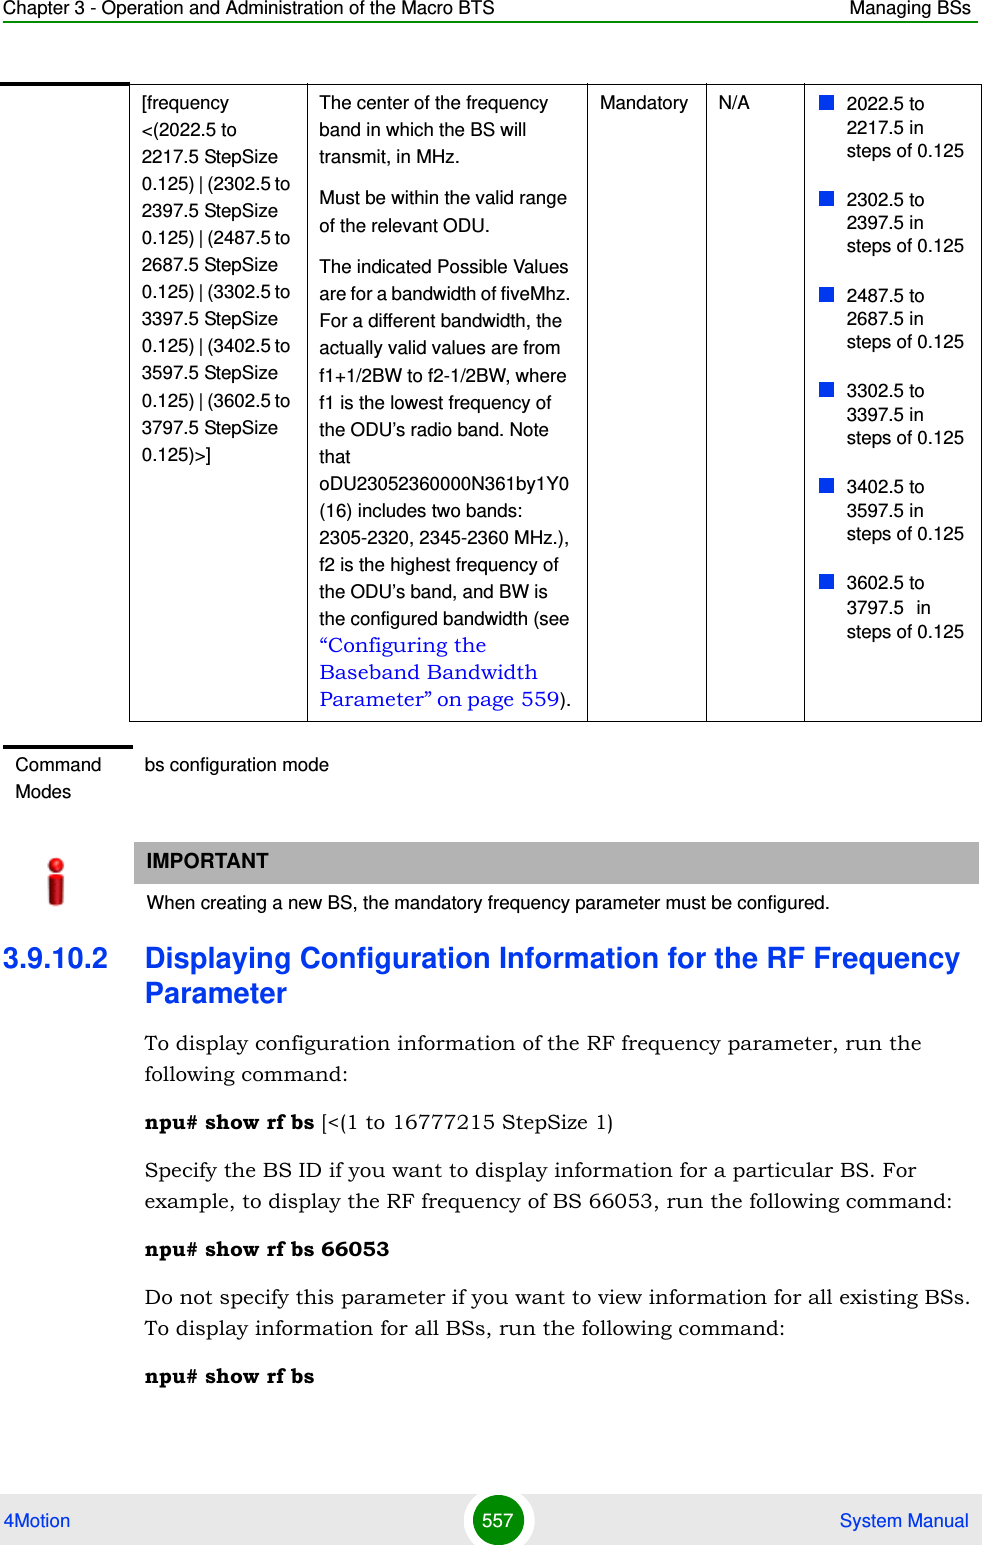 Chapter 3 - Operation and Administration of the Macro BTS Managing BSs4Motion 557  System Manual3.9.10.2 Displaying Configuration Information for the RF Frequency ParameterTo display configuration information of the RF frequency parameter, run the following command:npu# show rf bs [&lt;(1 to 16777215 StepSize 1)Specify the BS ID if you want to display information for a particular BS. For example, to display the RF frequency of BS 66053, run the following command:npu# show rf bs 66053Do not specify this parameter if you want to view information for all existing BSs. To display information for all BSs, run the following command:npu# show rf bs[frequency &lt;(2022.5 to 2217.5 StepSize 0.125) | (2302.5 to 2397.5 StepSize 0.125) | (2487.5 to 2687.5 StepSize 0.125) | (3302.5 to 3397.5 StepSize 0.125) | (3402.5 to 3597.5 StepSize 0.125) | (3602.5 to 3797.5 StepSize 0.125)&gt;]The center of the frequency band in which the BS will transmit, in MHz.Must be within the valid range of the relevant ODU.The indicated Possible Values are for a bandwidth of fiveMhz. For a different bandwidth, the actually valid values are from f1+1/2BW to f2-1/2BW, where f1 is the lowest frequency of the ODU’s radio band. Note that oDU23052360000N361by1Y0 (16) includes two bands: 2305-2320, 2345-2360 MHz.), f2 is the highest frequency of the ODU’s band, and BW is the configured bandwidth (see “Configuring the Baseband Bandwidth Parameter” on page 559). Mandatory N/A 2022.5 to 2217.5 in steps of 0.1252302.5 to 2397.5 in steps of 0.1252487.5 to 2687.5 in steps of 0.1253302.5 to 3397.5 in steps of 0.1253402.5 to 3597.5 in steps of 0.1253602.5 to 3797.5 in steps of 0.125Command Modesbs configuration modeIMPORTANTWhen creating a new BS, the mandatory frequency parameter must be configured.